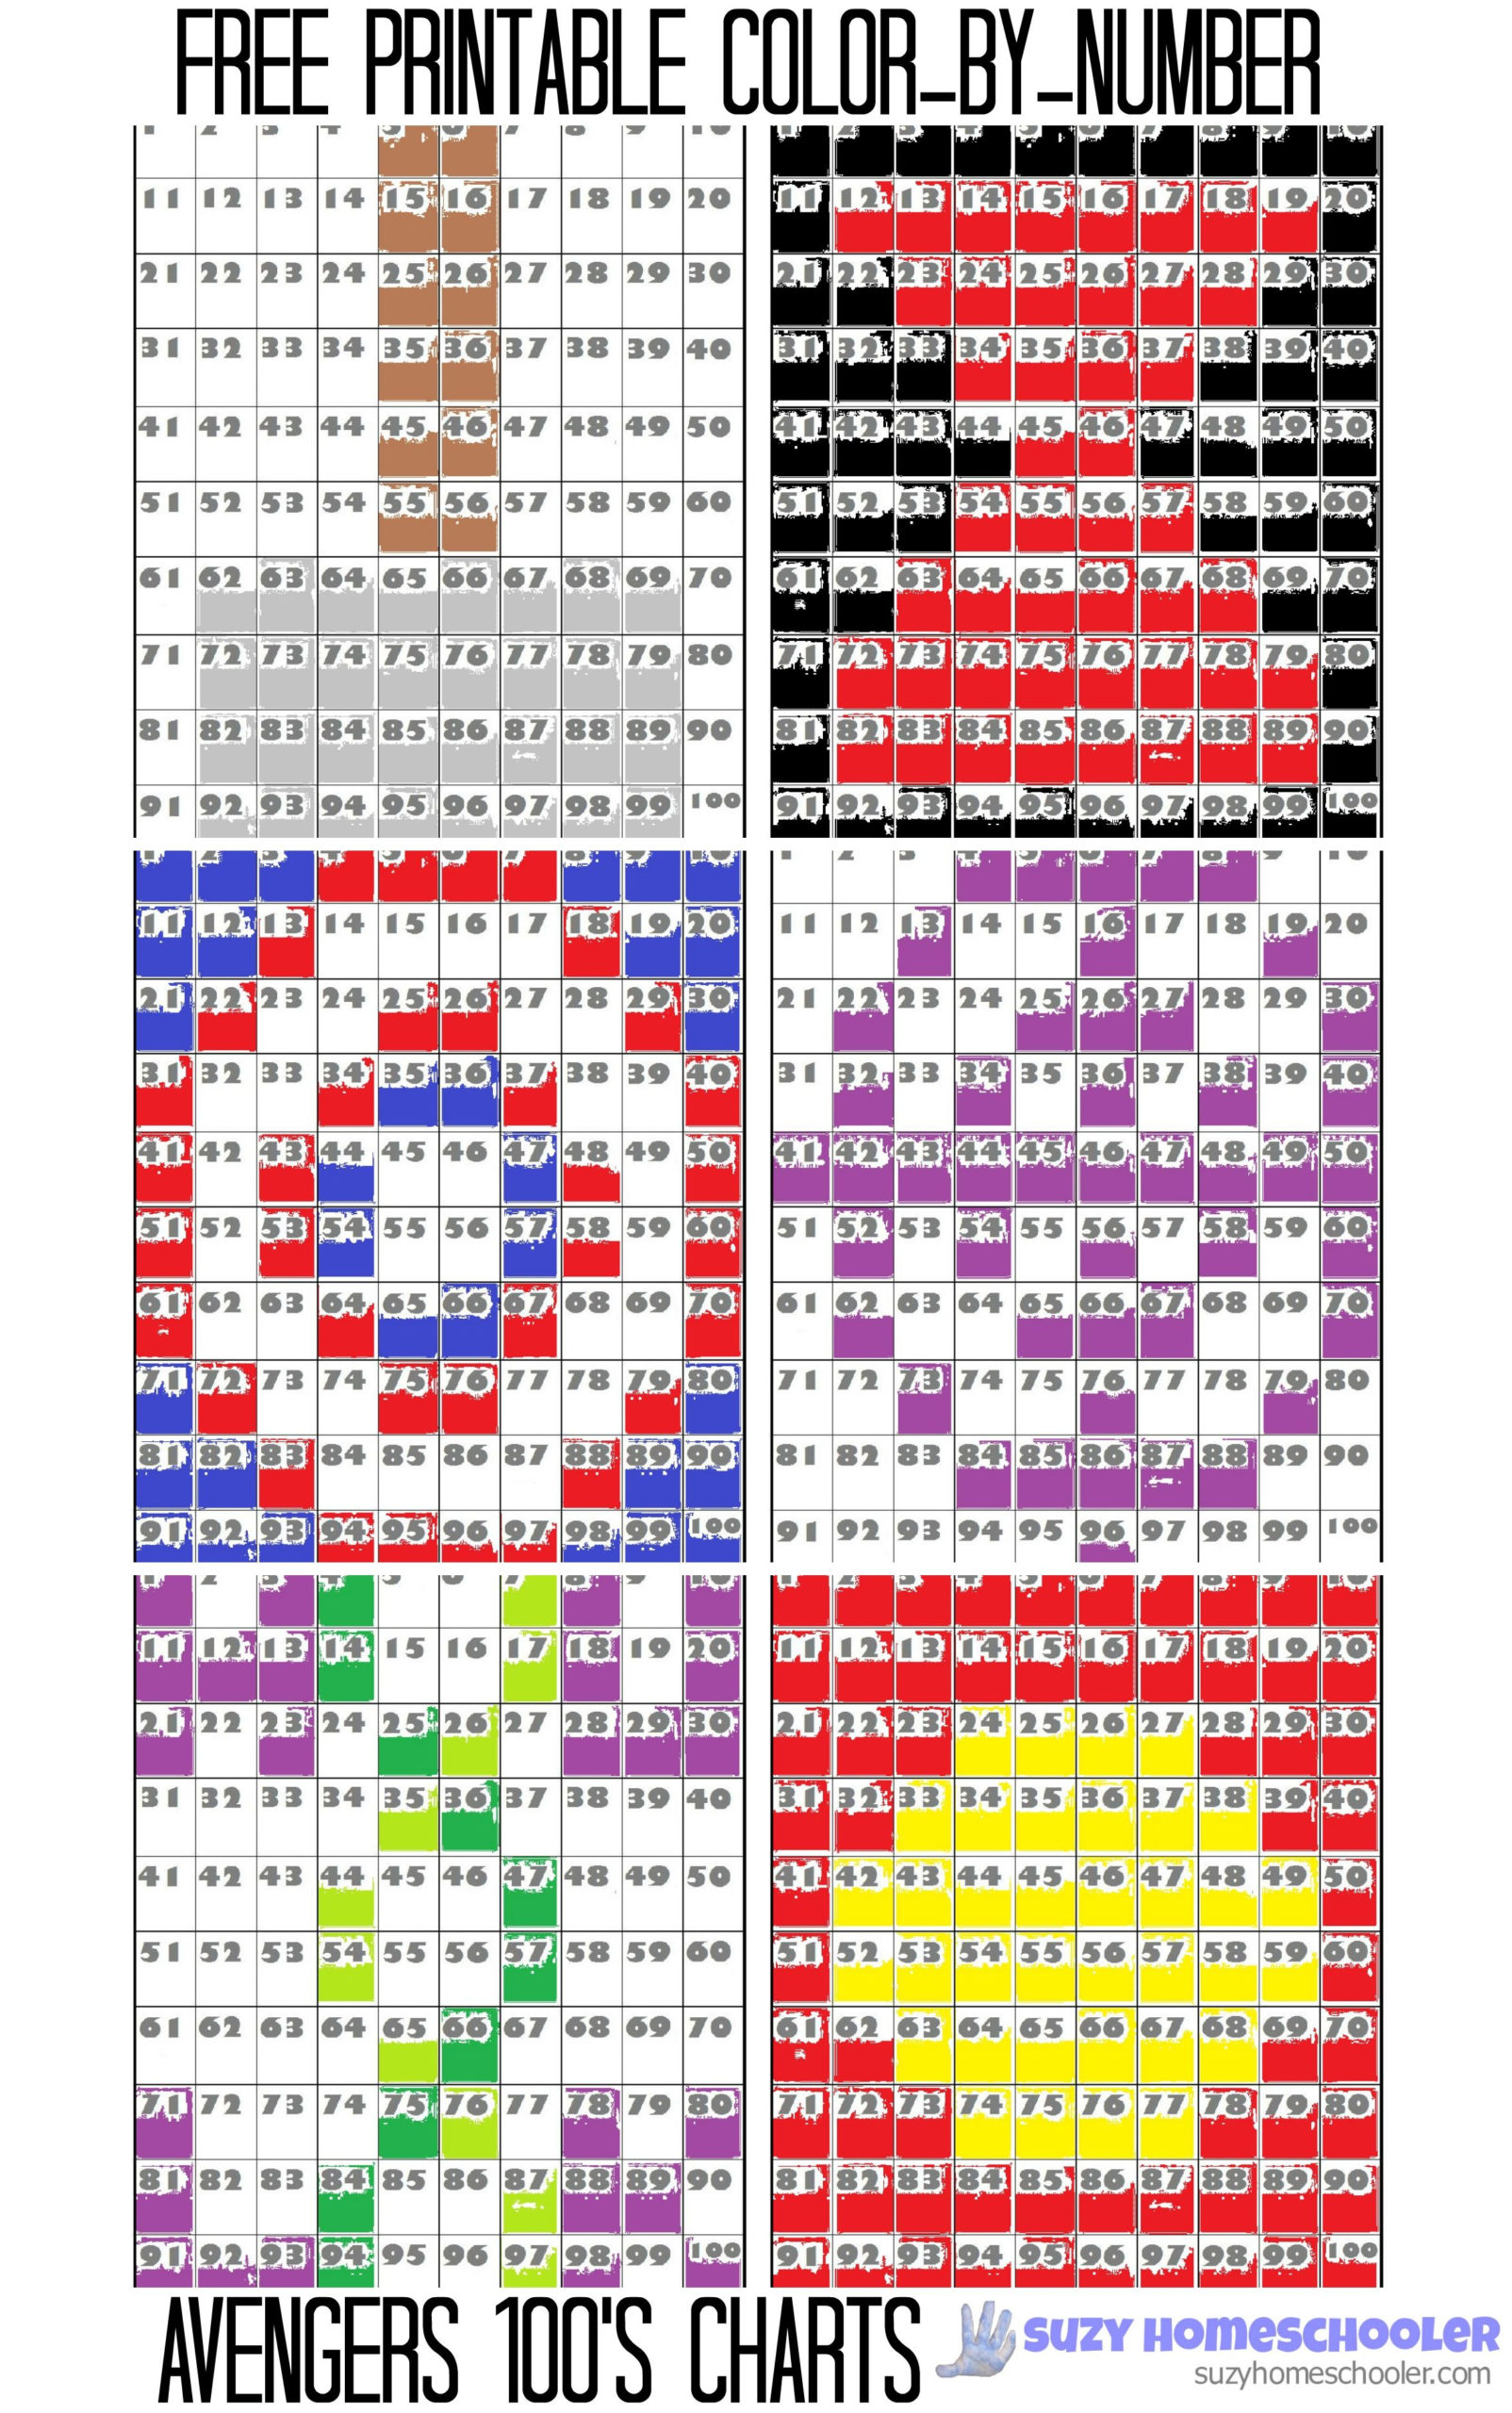 Free Printable Color by Number Avengers 100 s Charts 